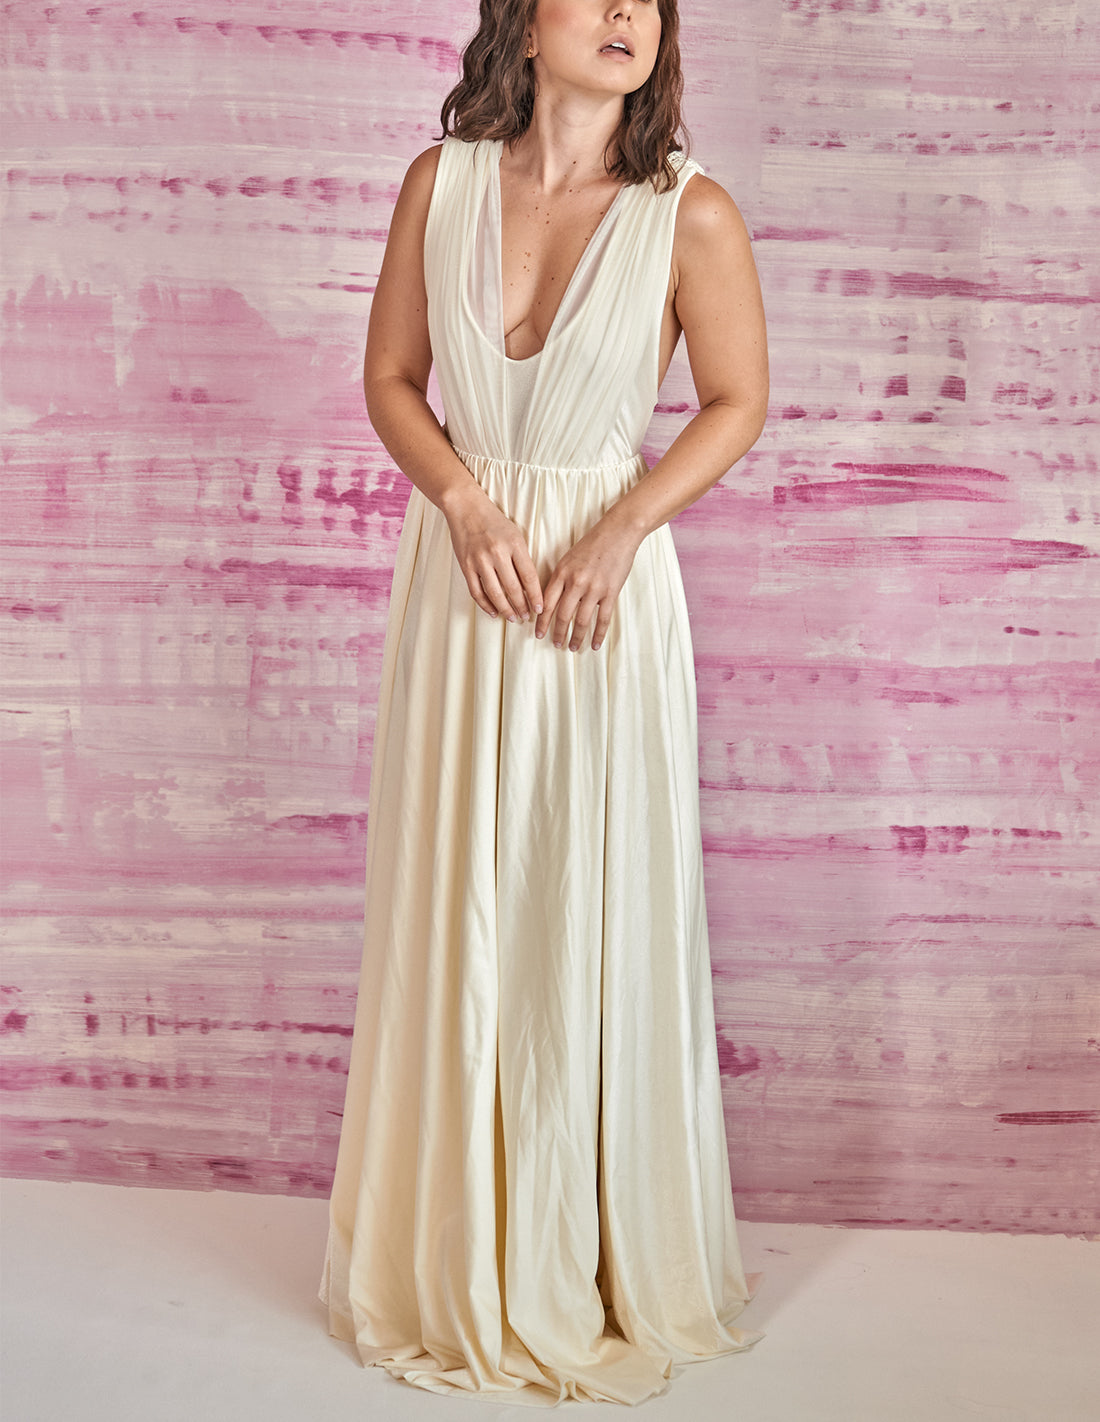 Big Bang Dress Ivory. Dress With Hand Woven Macramé In Ivory. Entreaguas